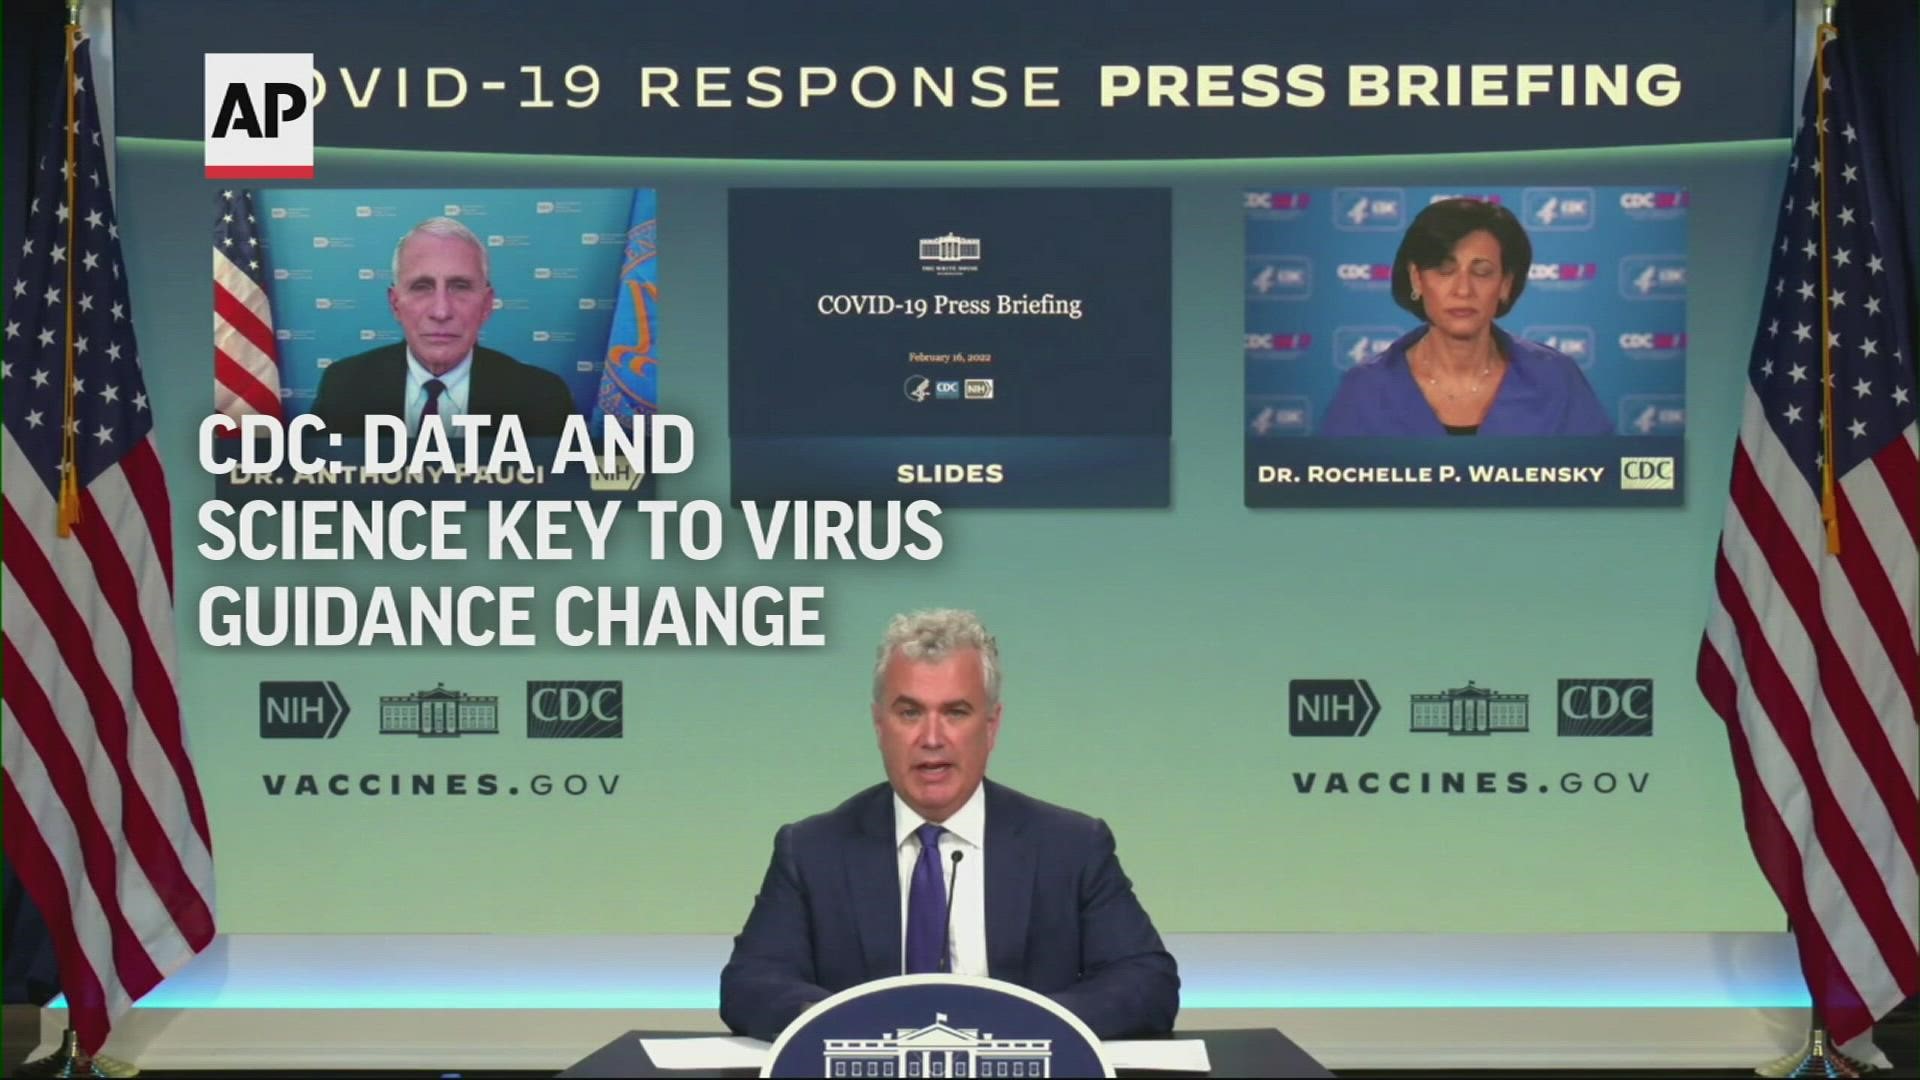 CDC Director Dr. Rochelle Walensky says we share the same goal to make the virus not a constant crisis, but guidance changes will only be based on data and science.